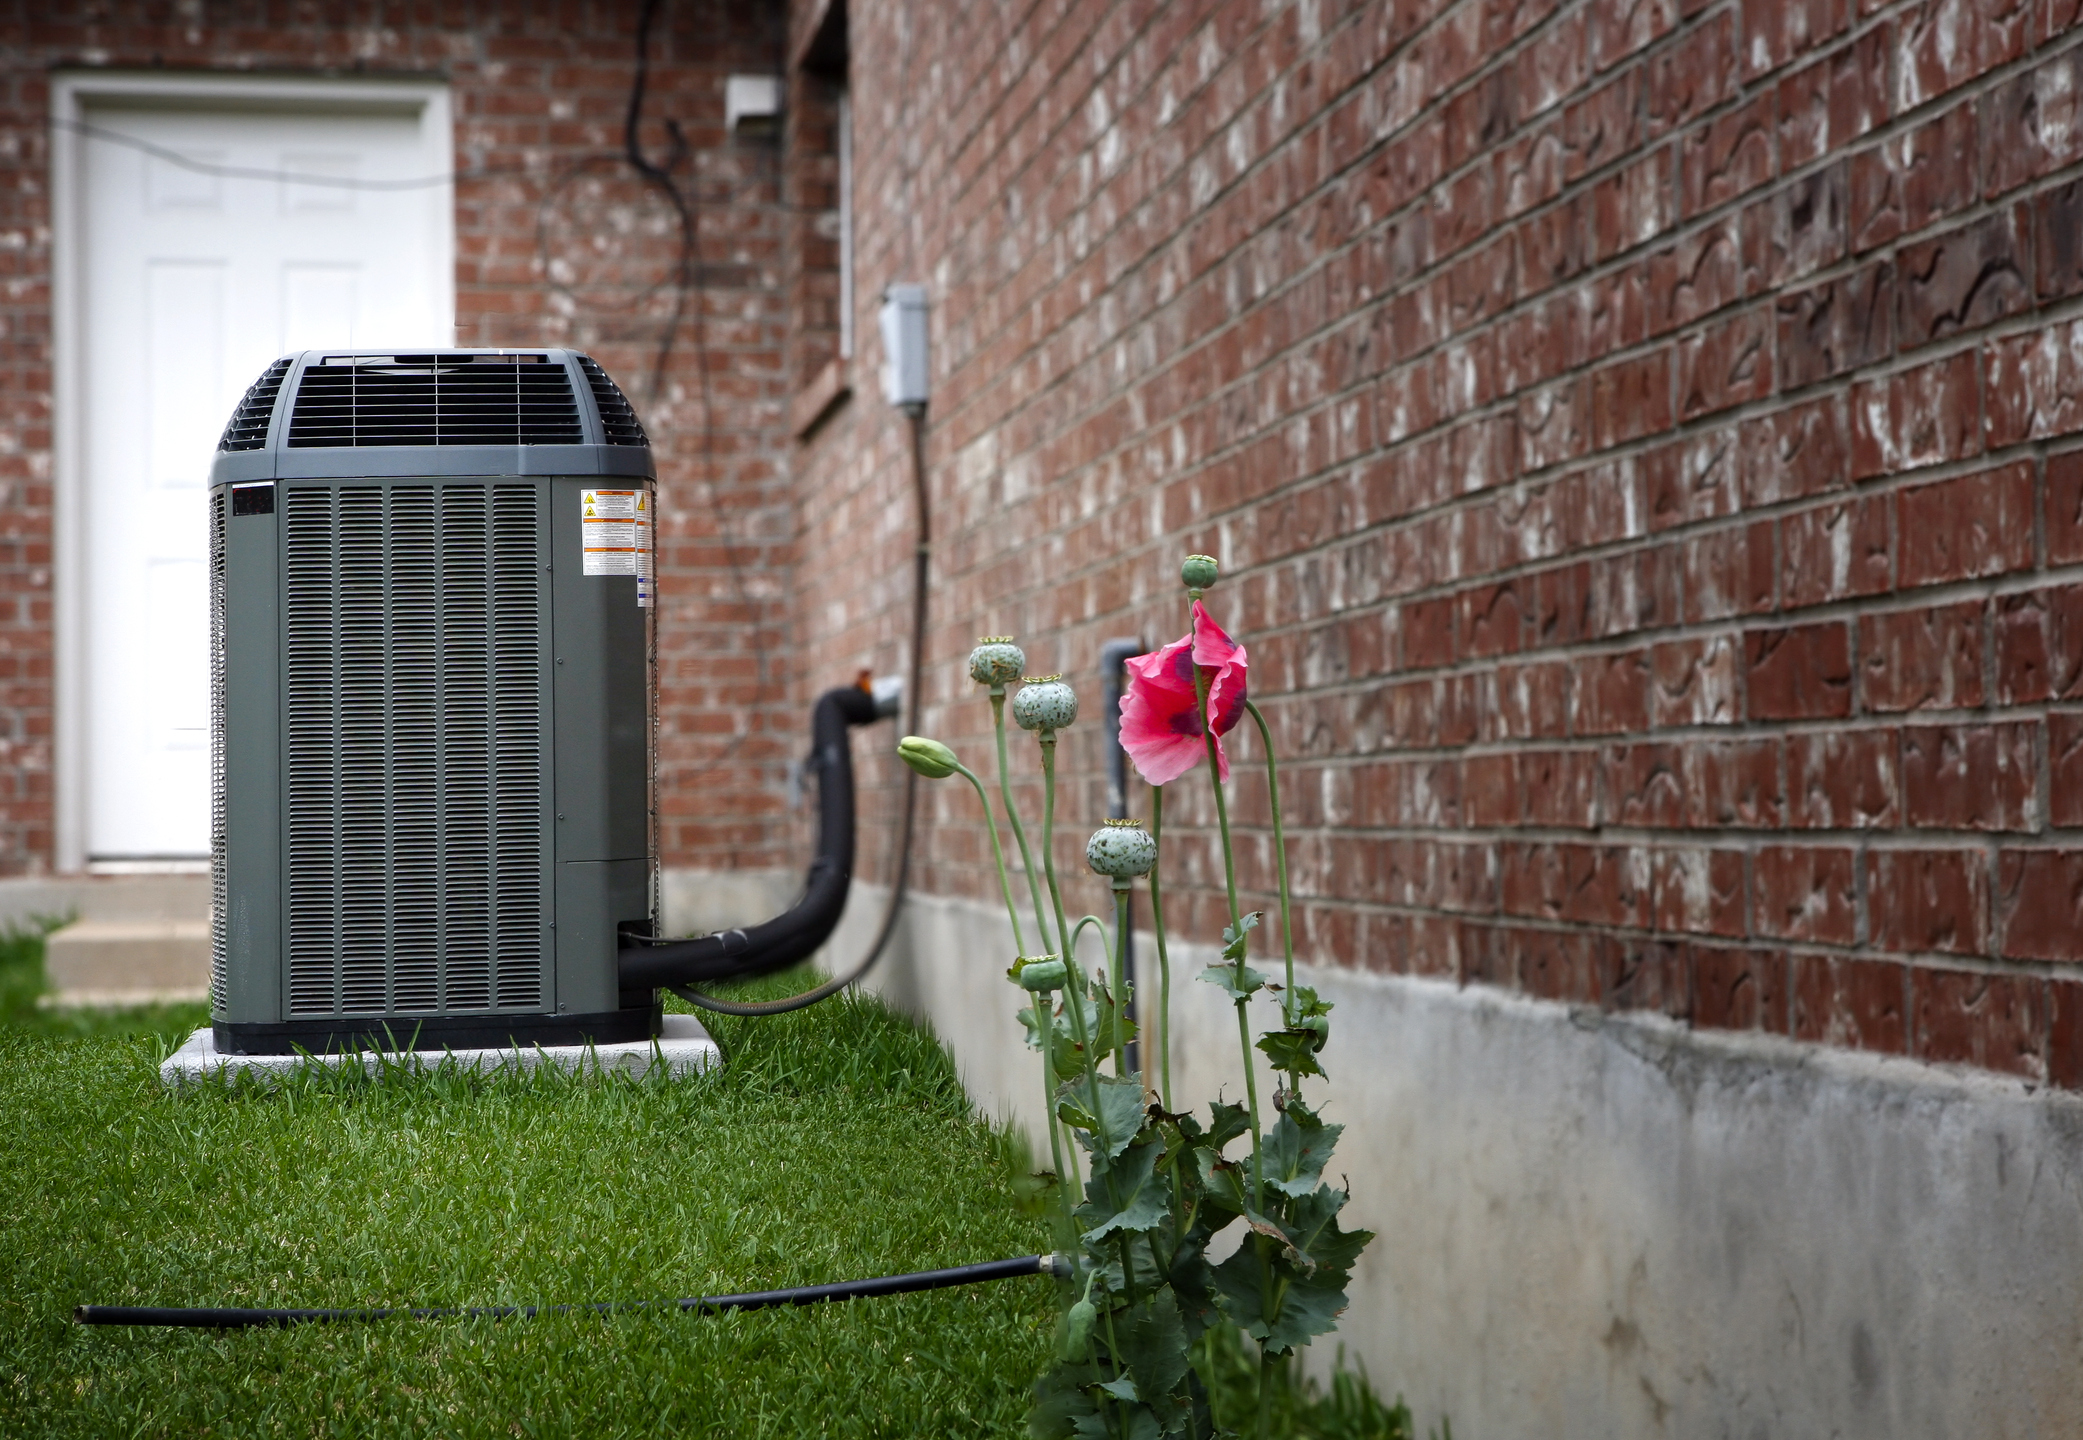 AC unit outside a brick home surrounded by grass with flowers in the forefront